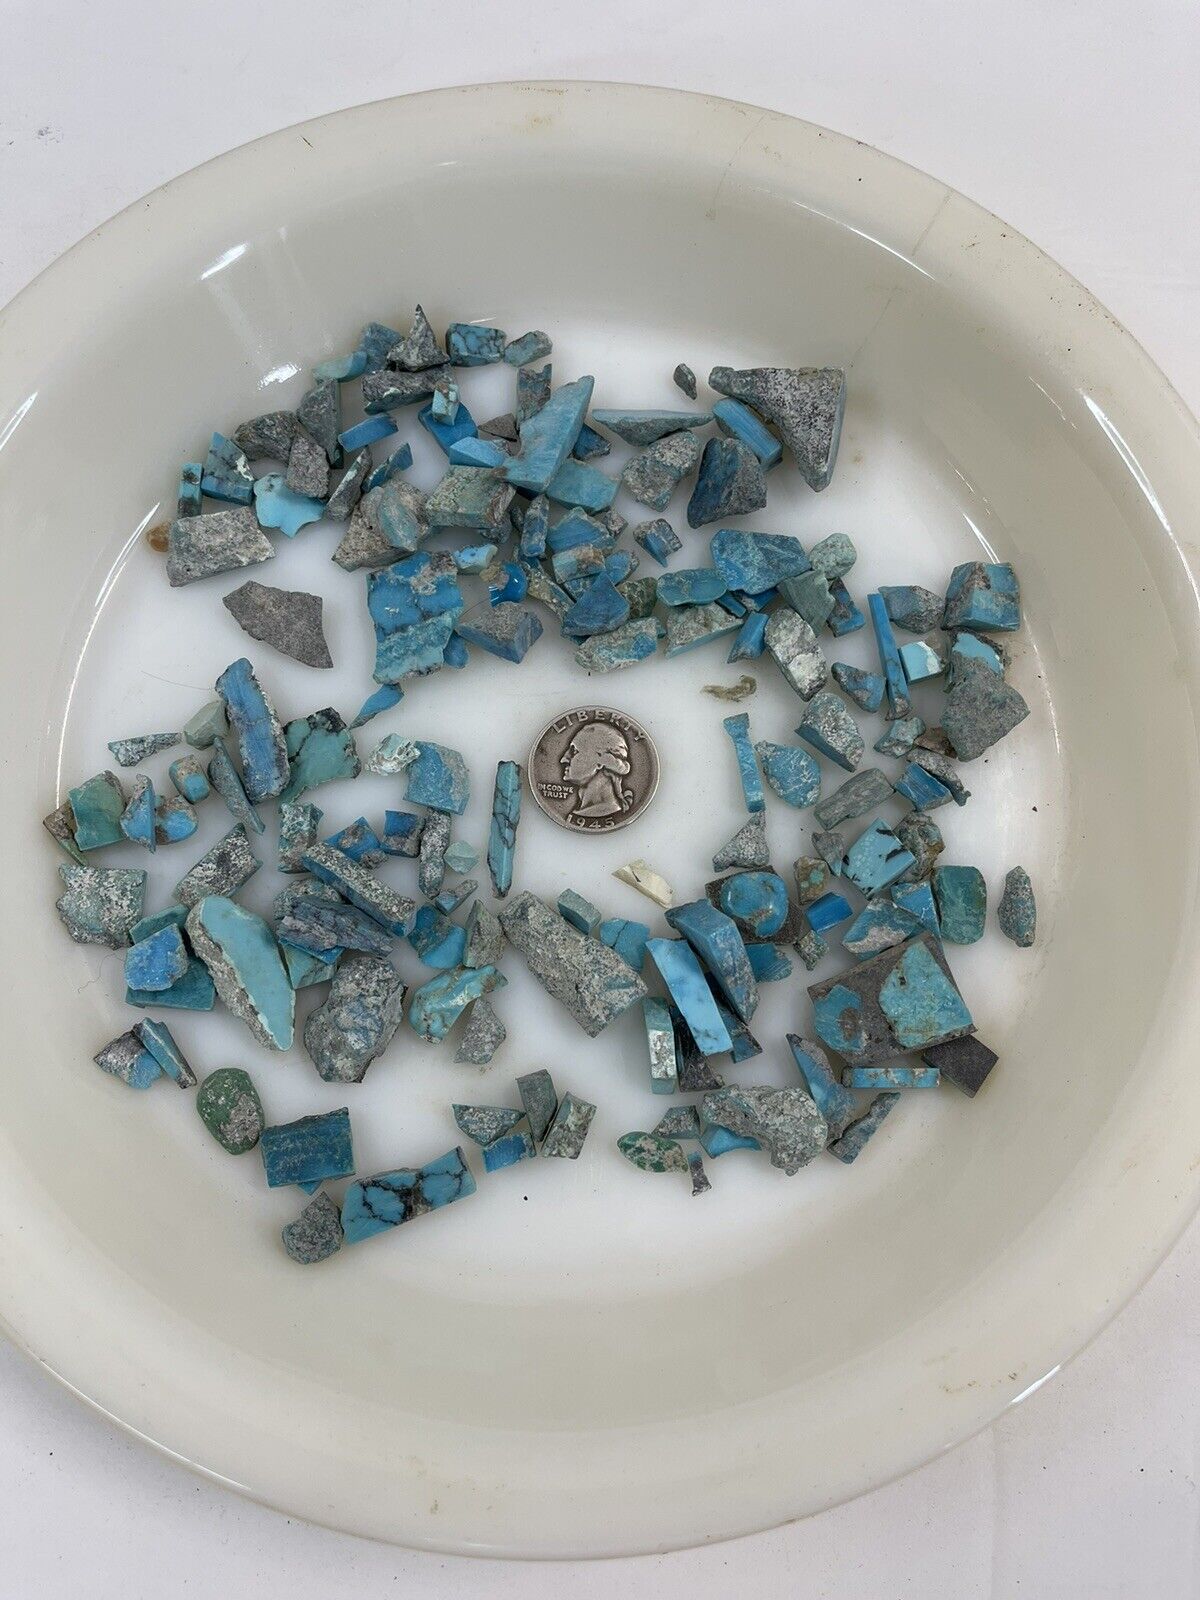 Lot of 100+g grams Turquoise Rough Jewelry Making Old Stock AZ Estate *g